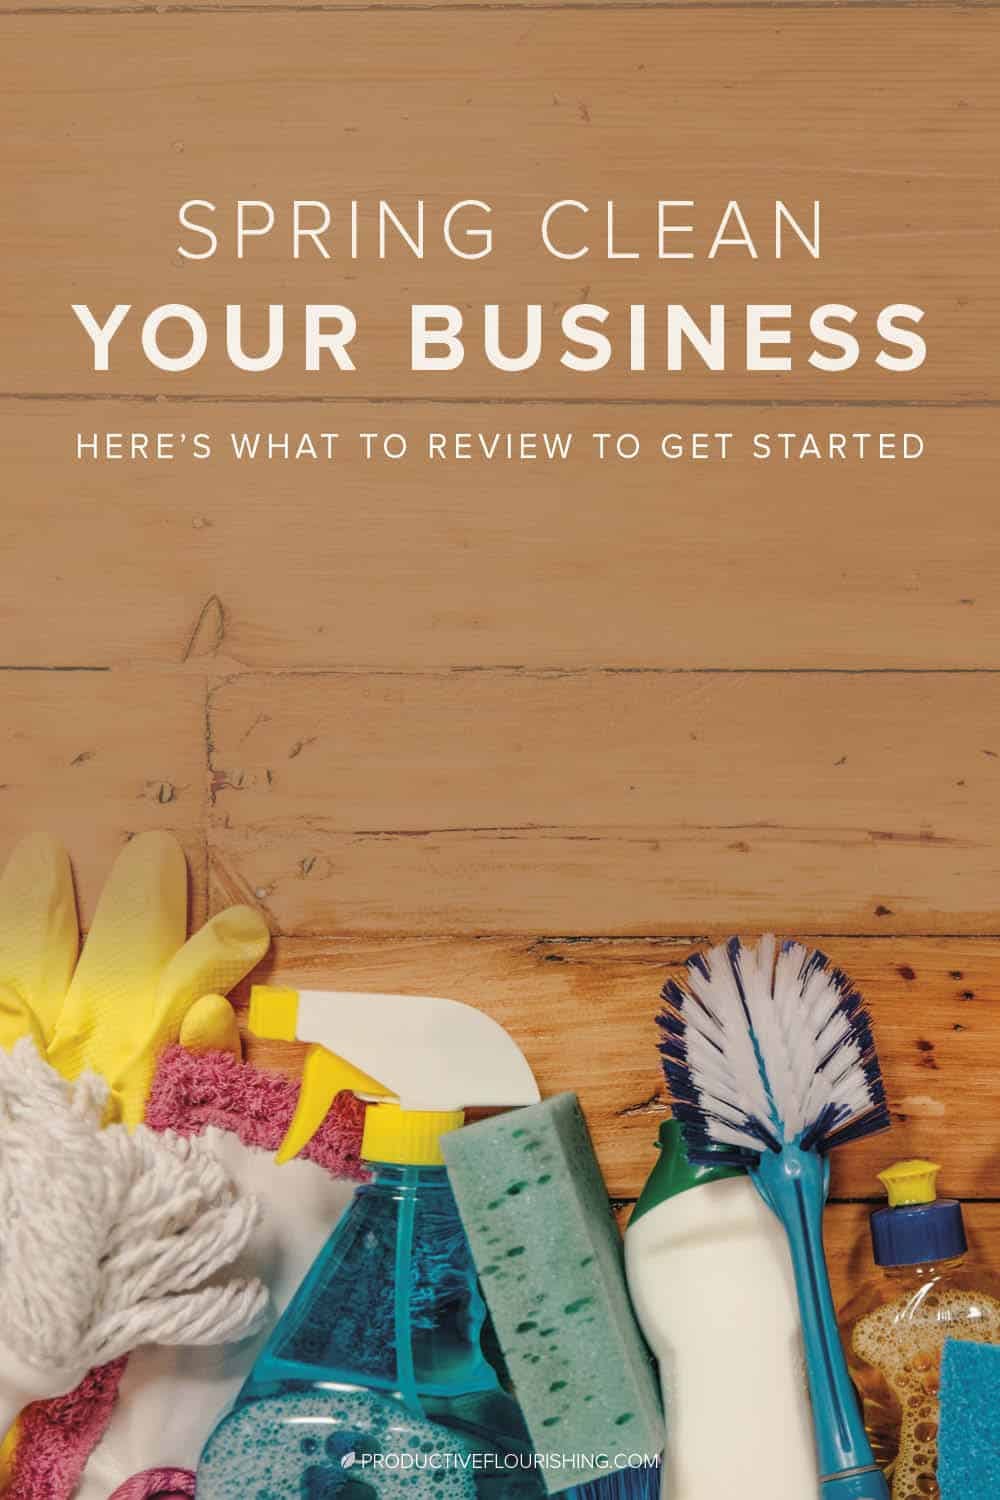 Spring can’t come soon enough. Winter has been a difficult one for many entrepreneurs this year. With that spring sunshine often comes a burst of renewed energy. Welcome: spring cleaning for your small business. Learn 3 ways to spring clean your business here and become more productive. #springcleaning #entrepreneurship #productiveflourishing